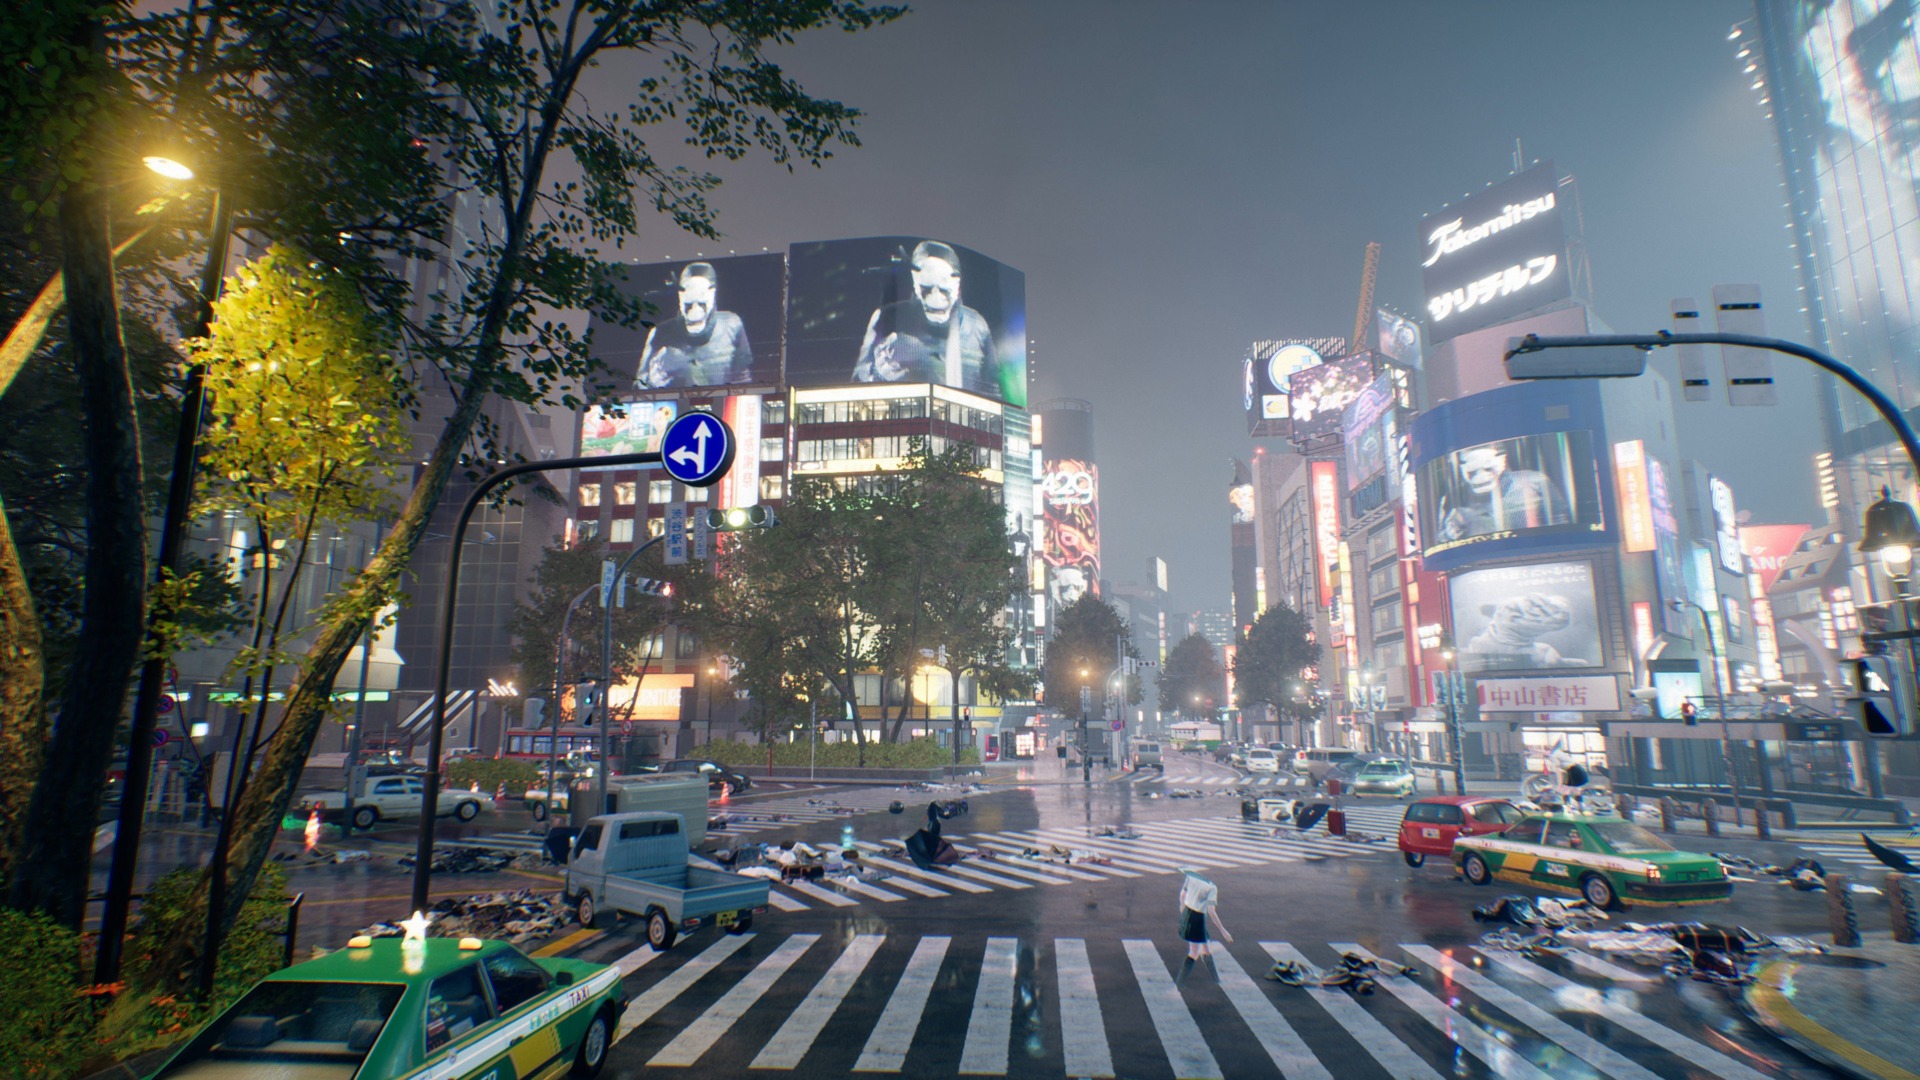 Preview: Ghostwire: Tokyo's Gameplay Loop Involves Shrines and Spirits